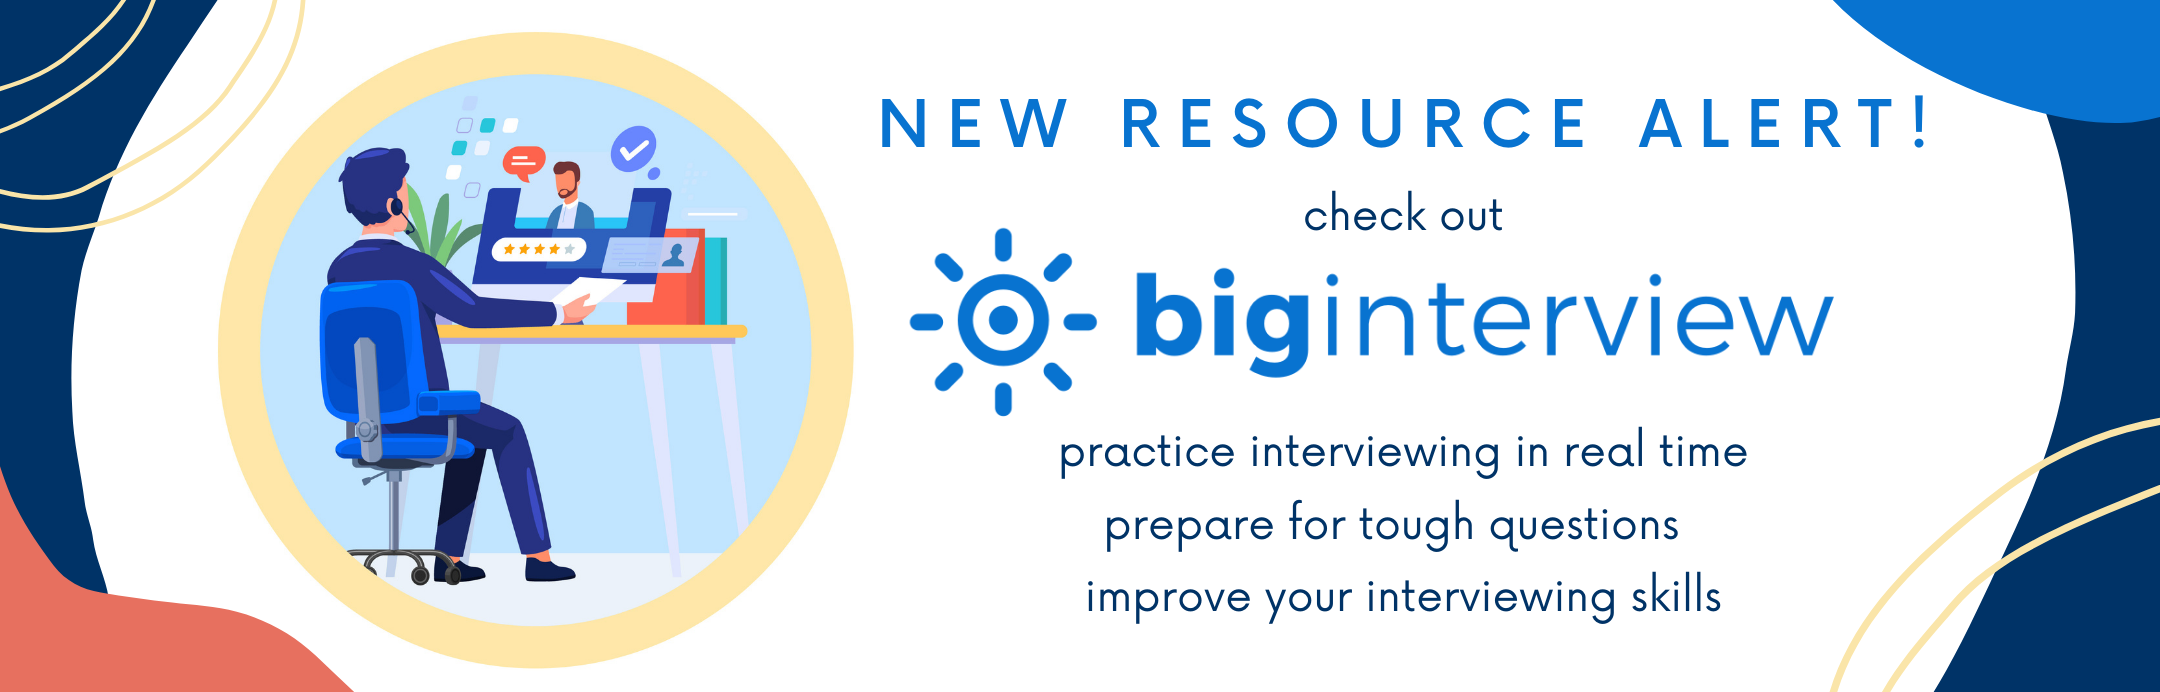 Check out Big Interview! Practice interviewing in real time; prepare for tough questions; improve your interviewing skills. Click here to learn more.